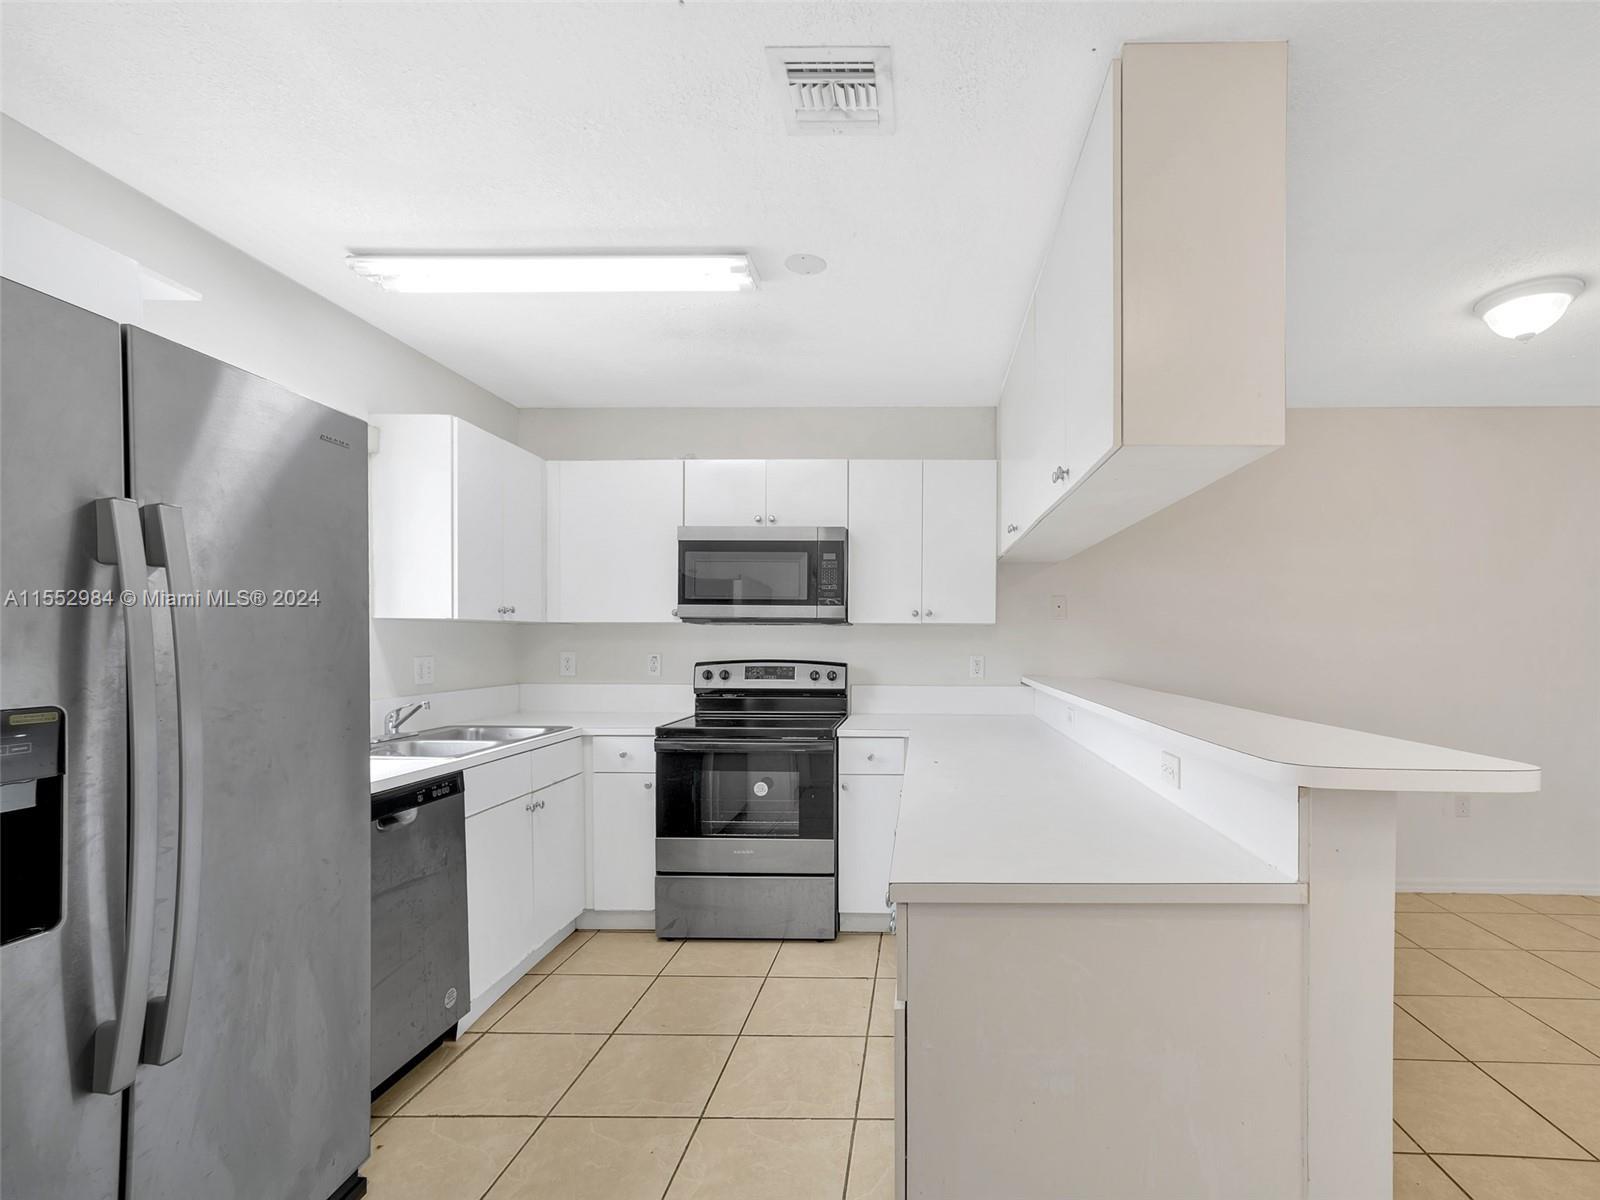 Beautiful townhouse in Hollywood 3/2.5 with private patio, property have new appliances, new laminat